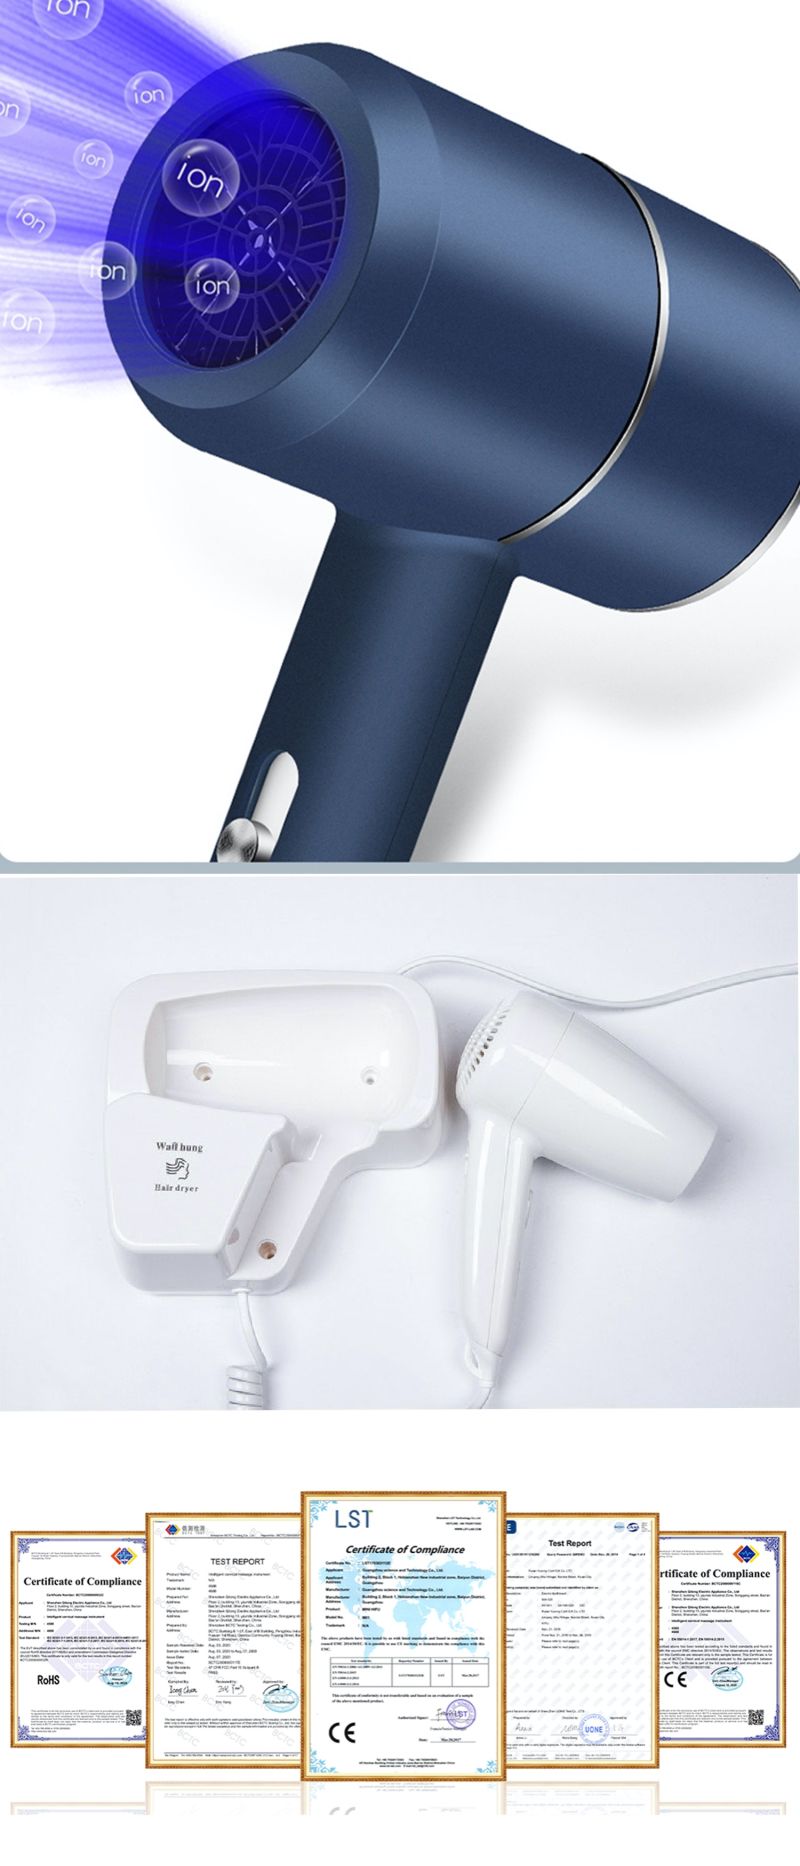 Hotel Hair Dryer Hotel Use Safe Using Bathroom Mini Electric Hotel Hairdryer 1300W Wall Mounted White Hair Dryer